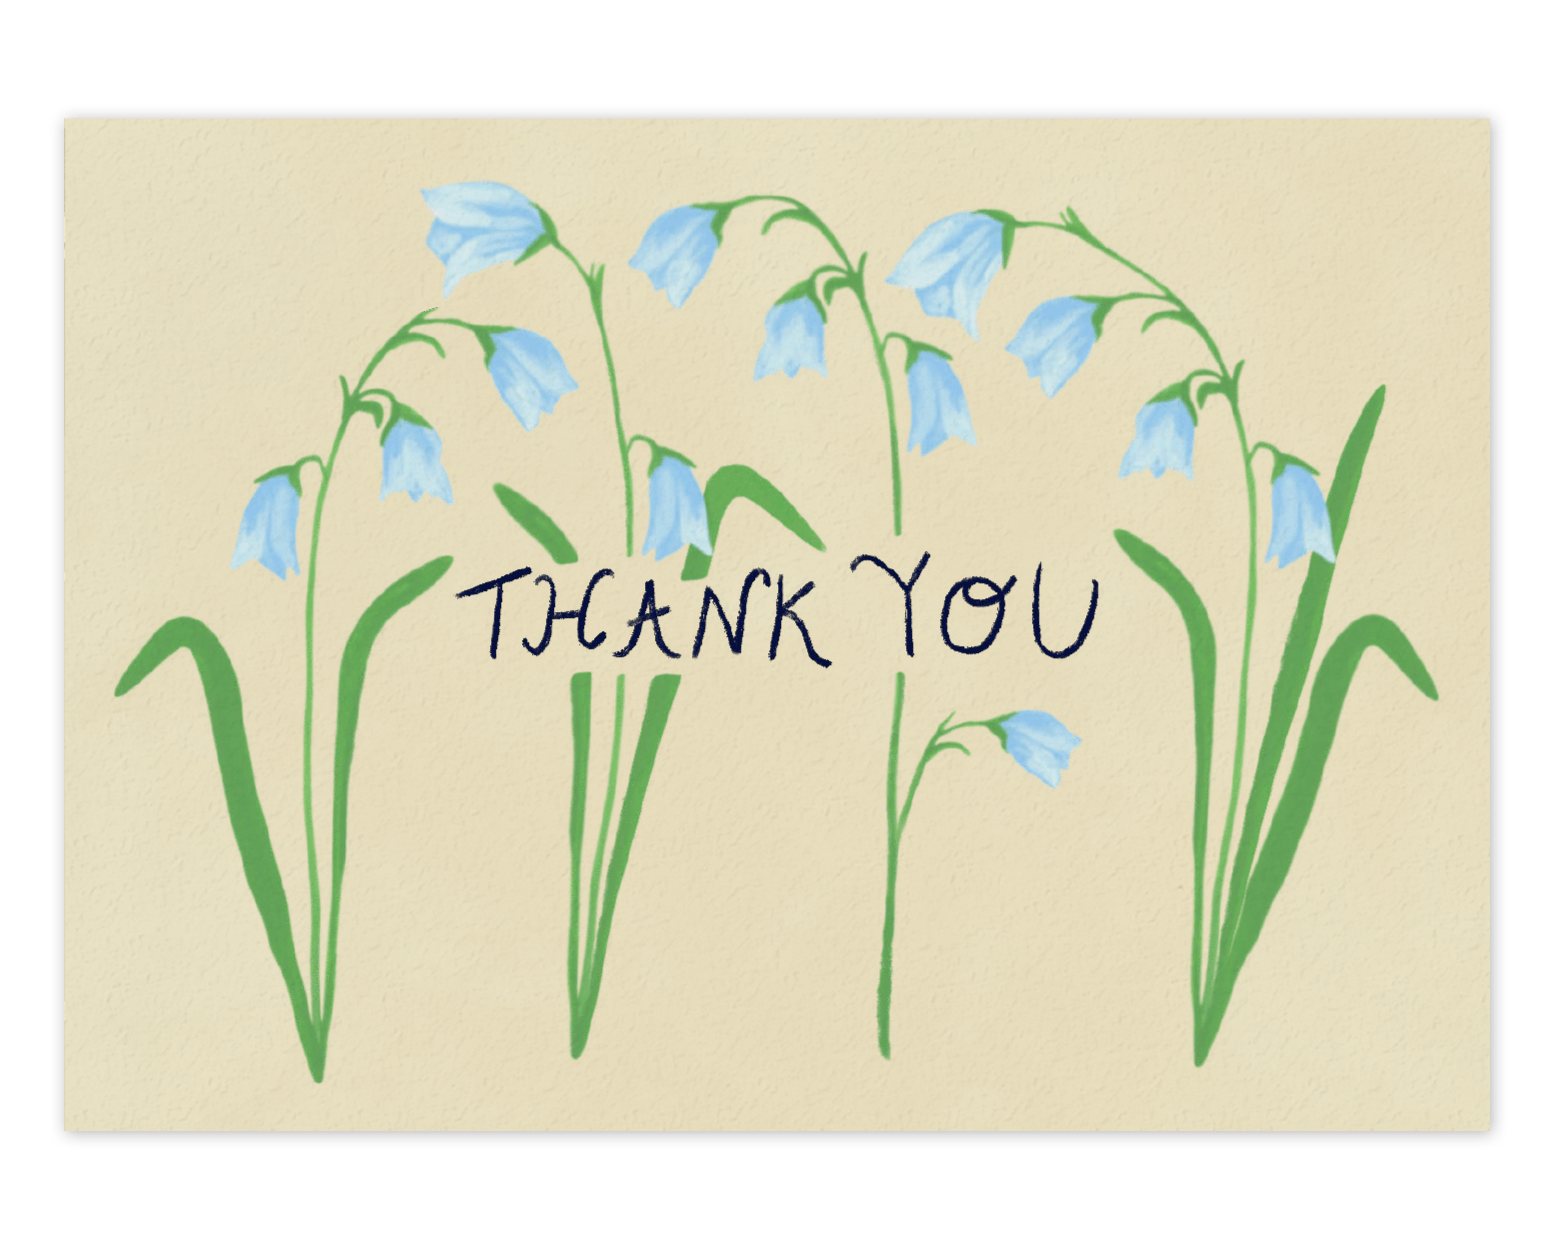 Four stems of drooping blue forest flowers cover the card nearly top to bottom horizontally, with the words &quot;Thank You&quot; going through the center of them in black ink. This design is printed on a cream colored background. 